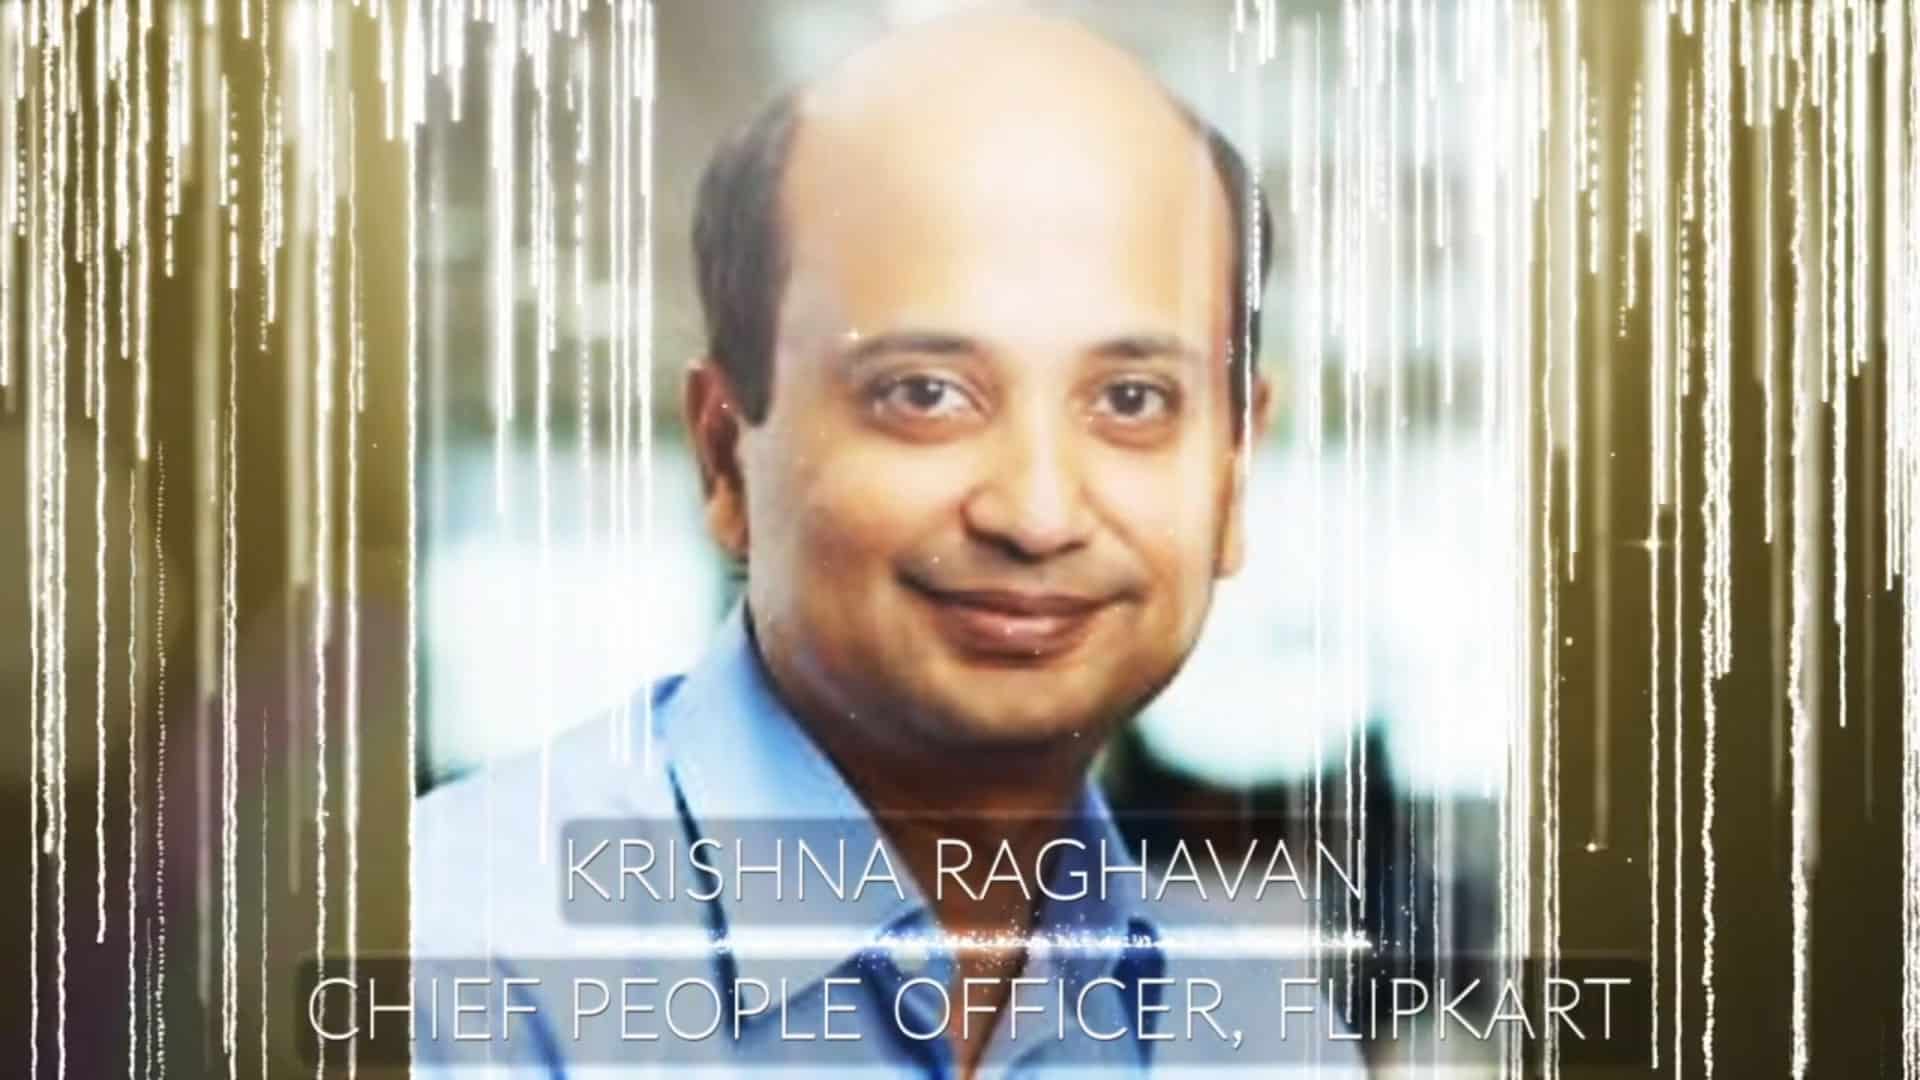 Accolades to Mr. Krishna Raghavan for leading from the front!